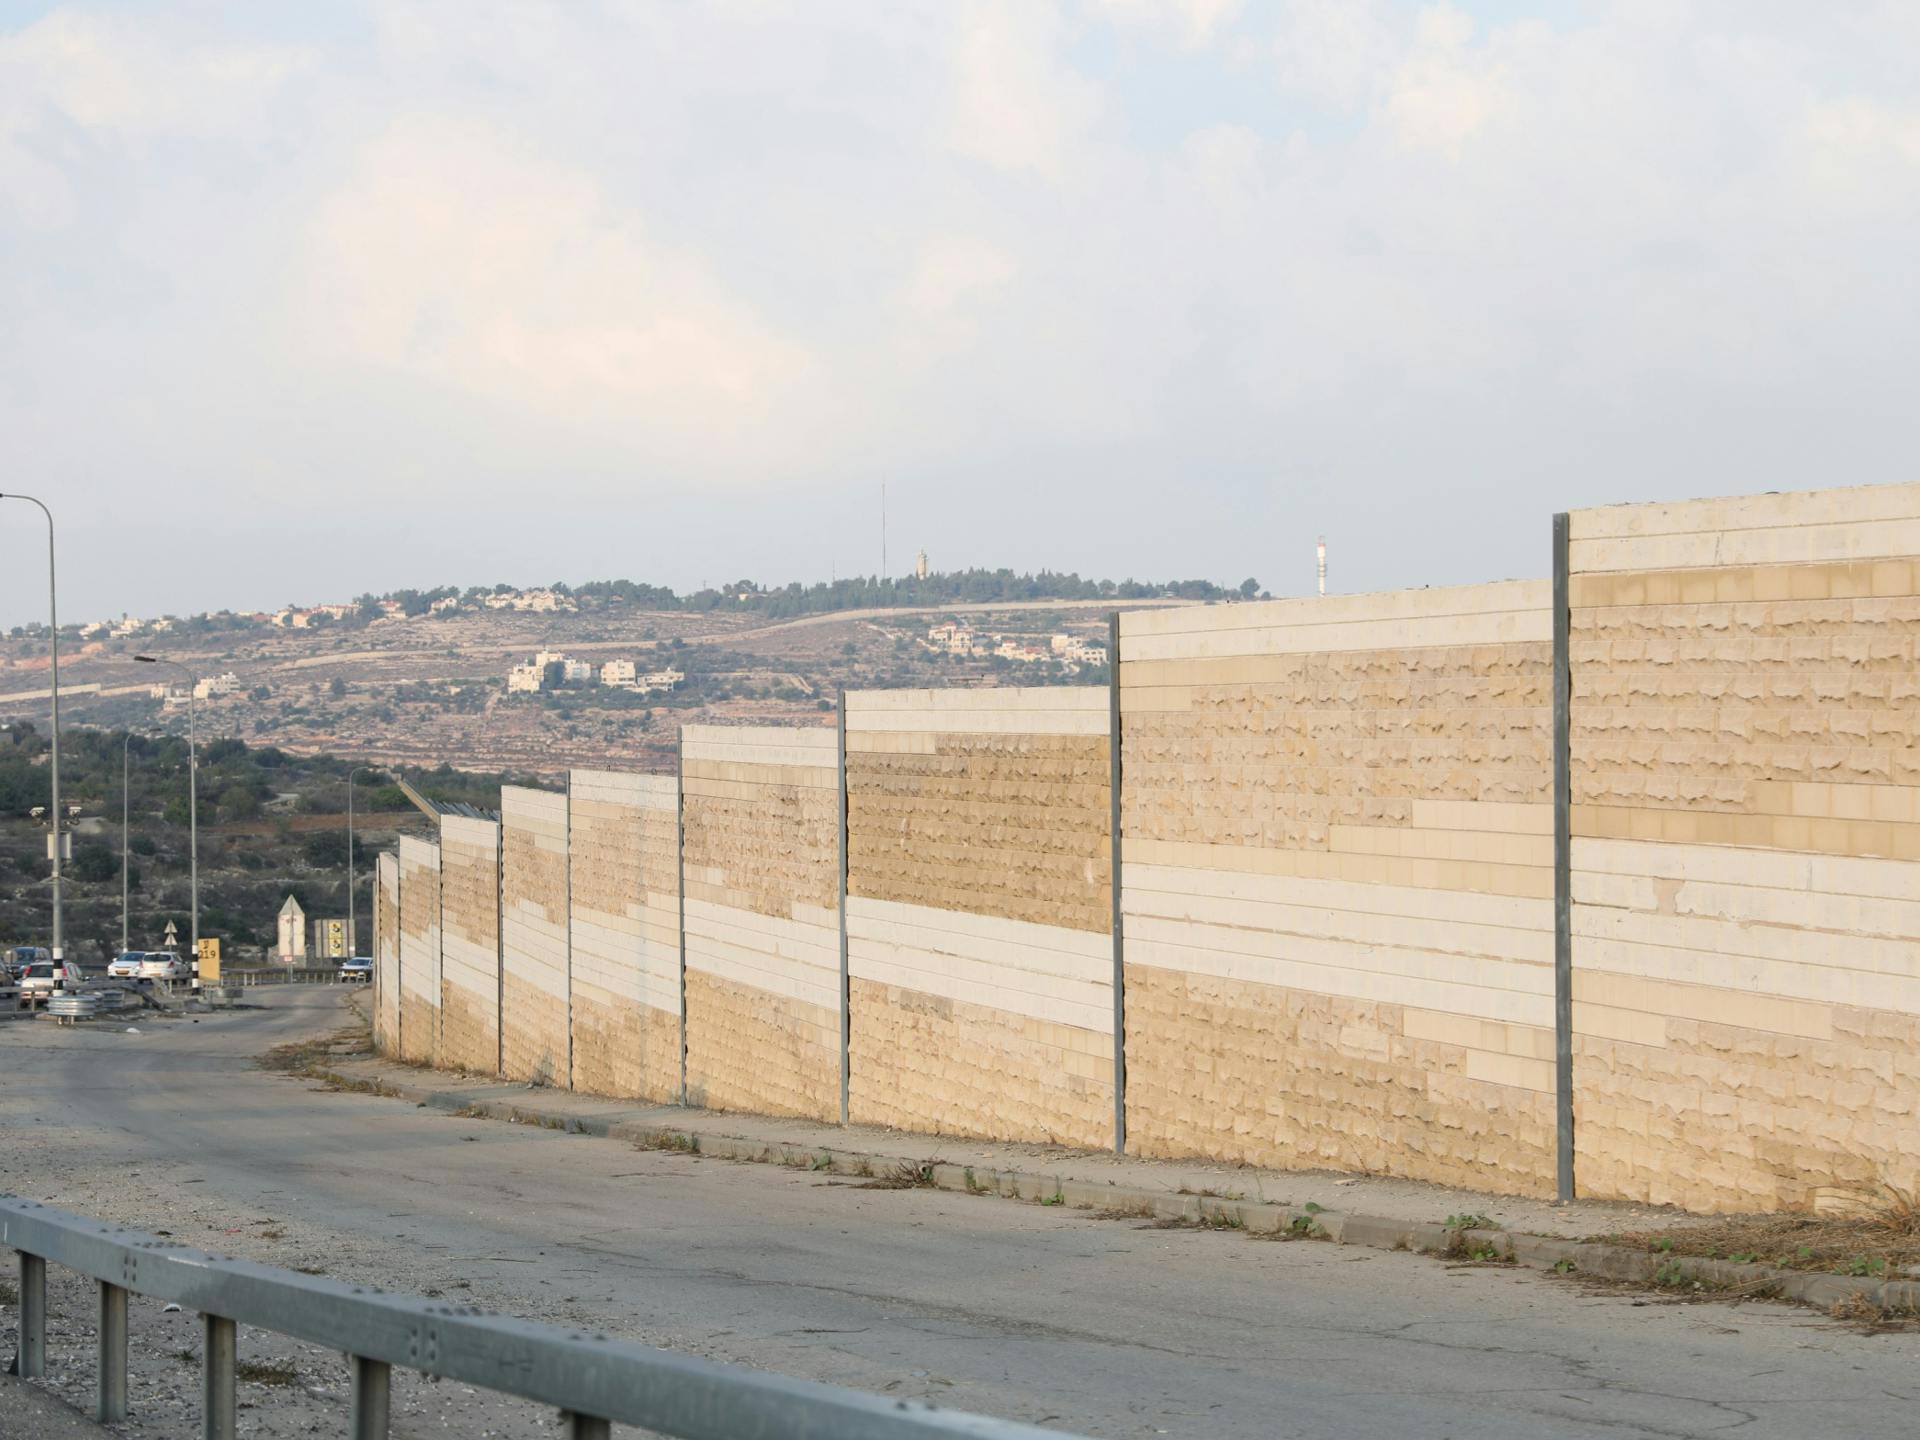 An image of a large wall leading down a hill.